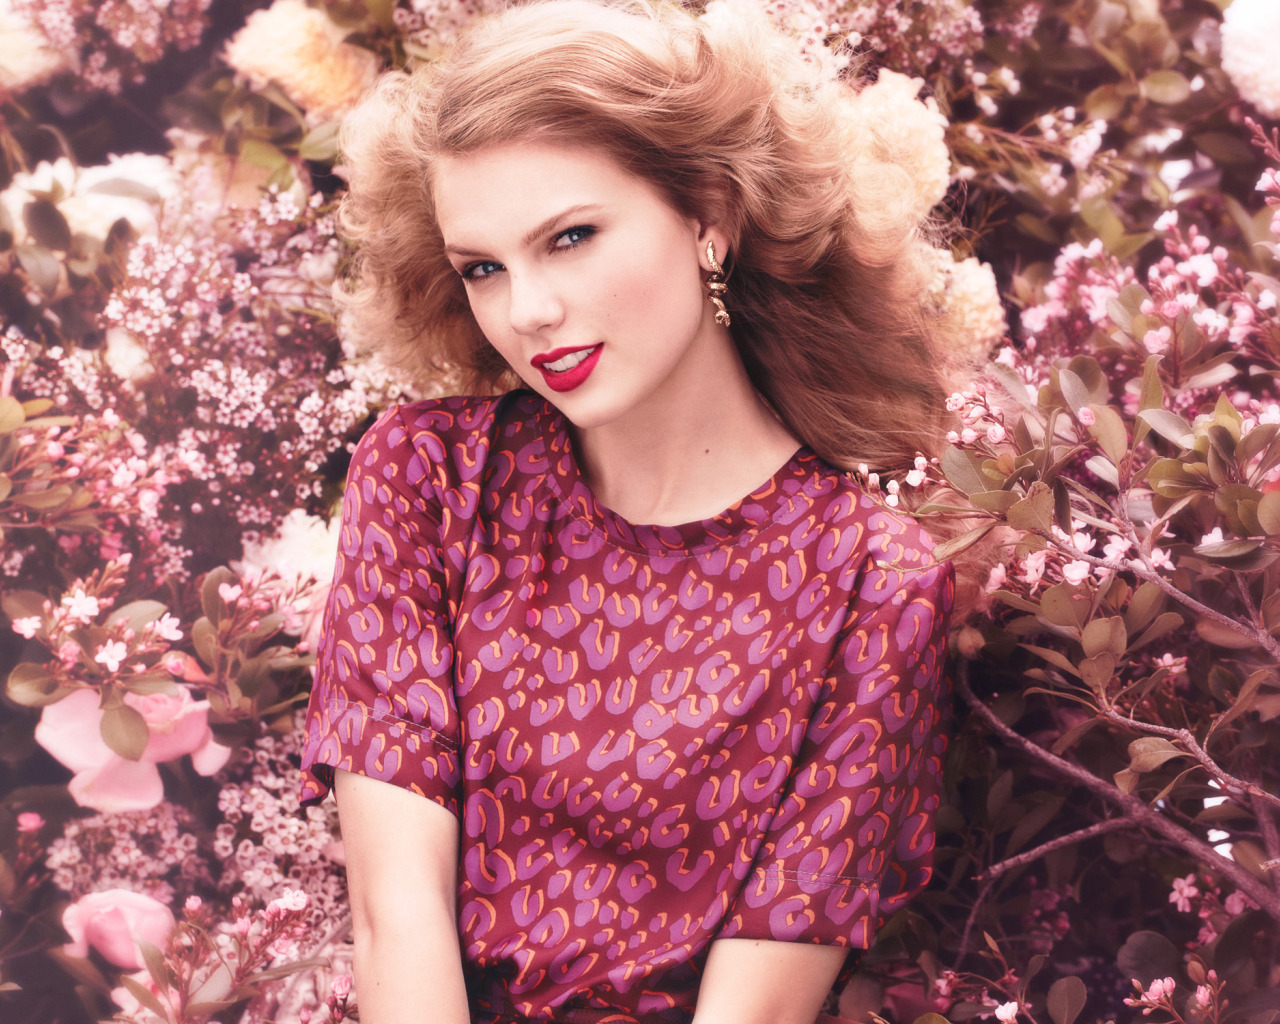 flowers, actress, singer, Taylor Swift, beauty, the bushes, photoshoot, Tay...